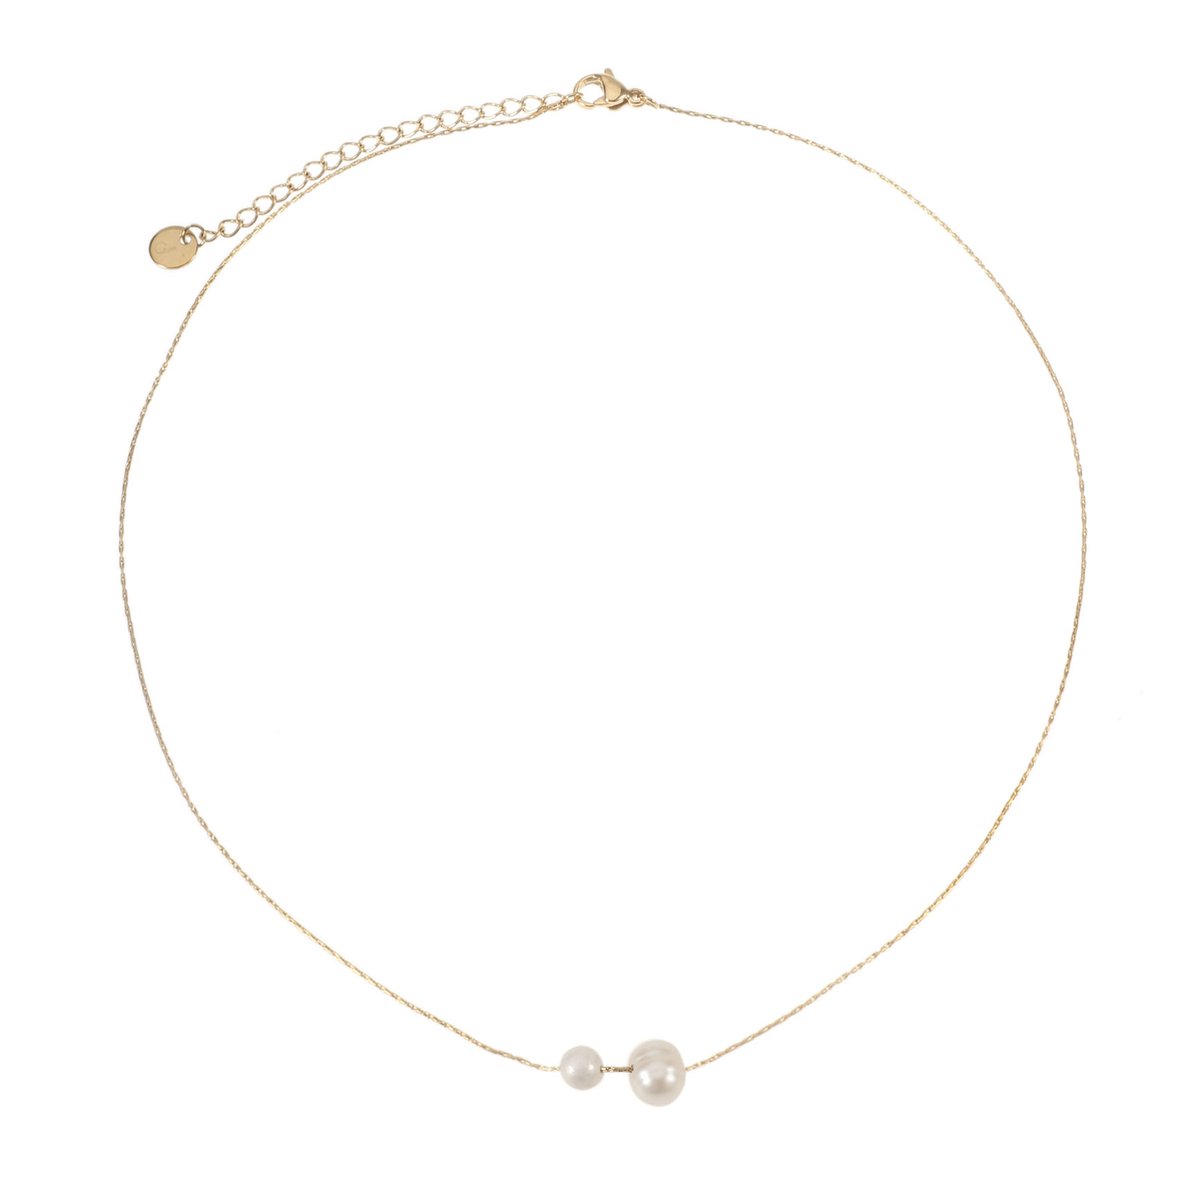 The Jewellery Club - Anne pearl necklace - Ketting - Dames ketting - Stainless steel - Goud - 38 cm